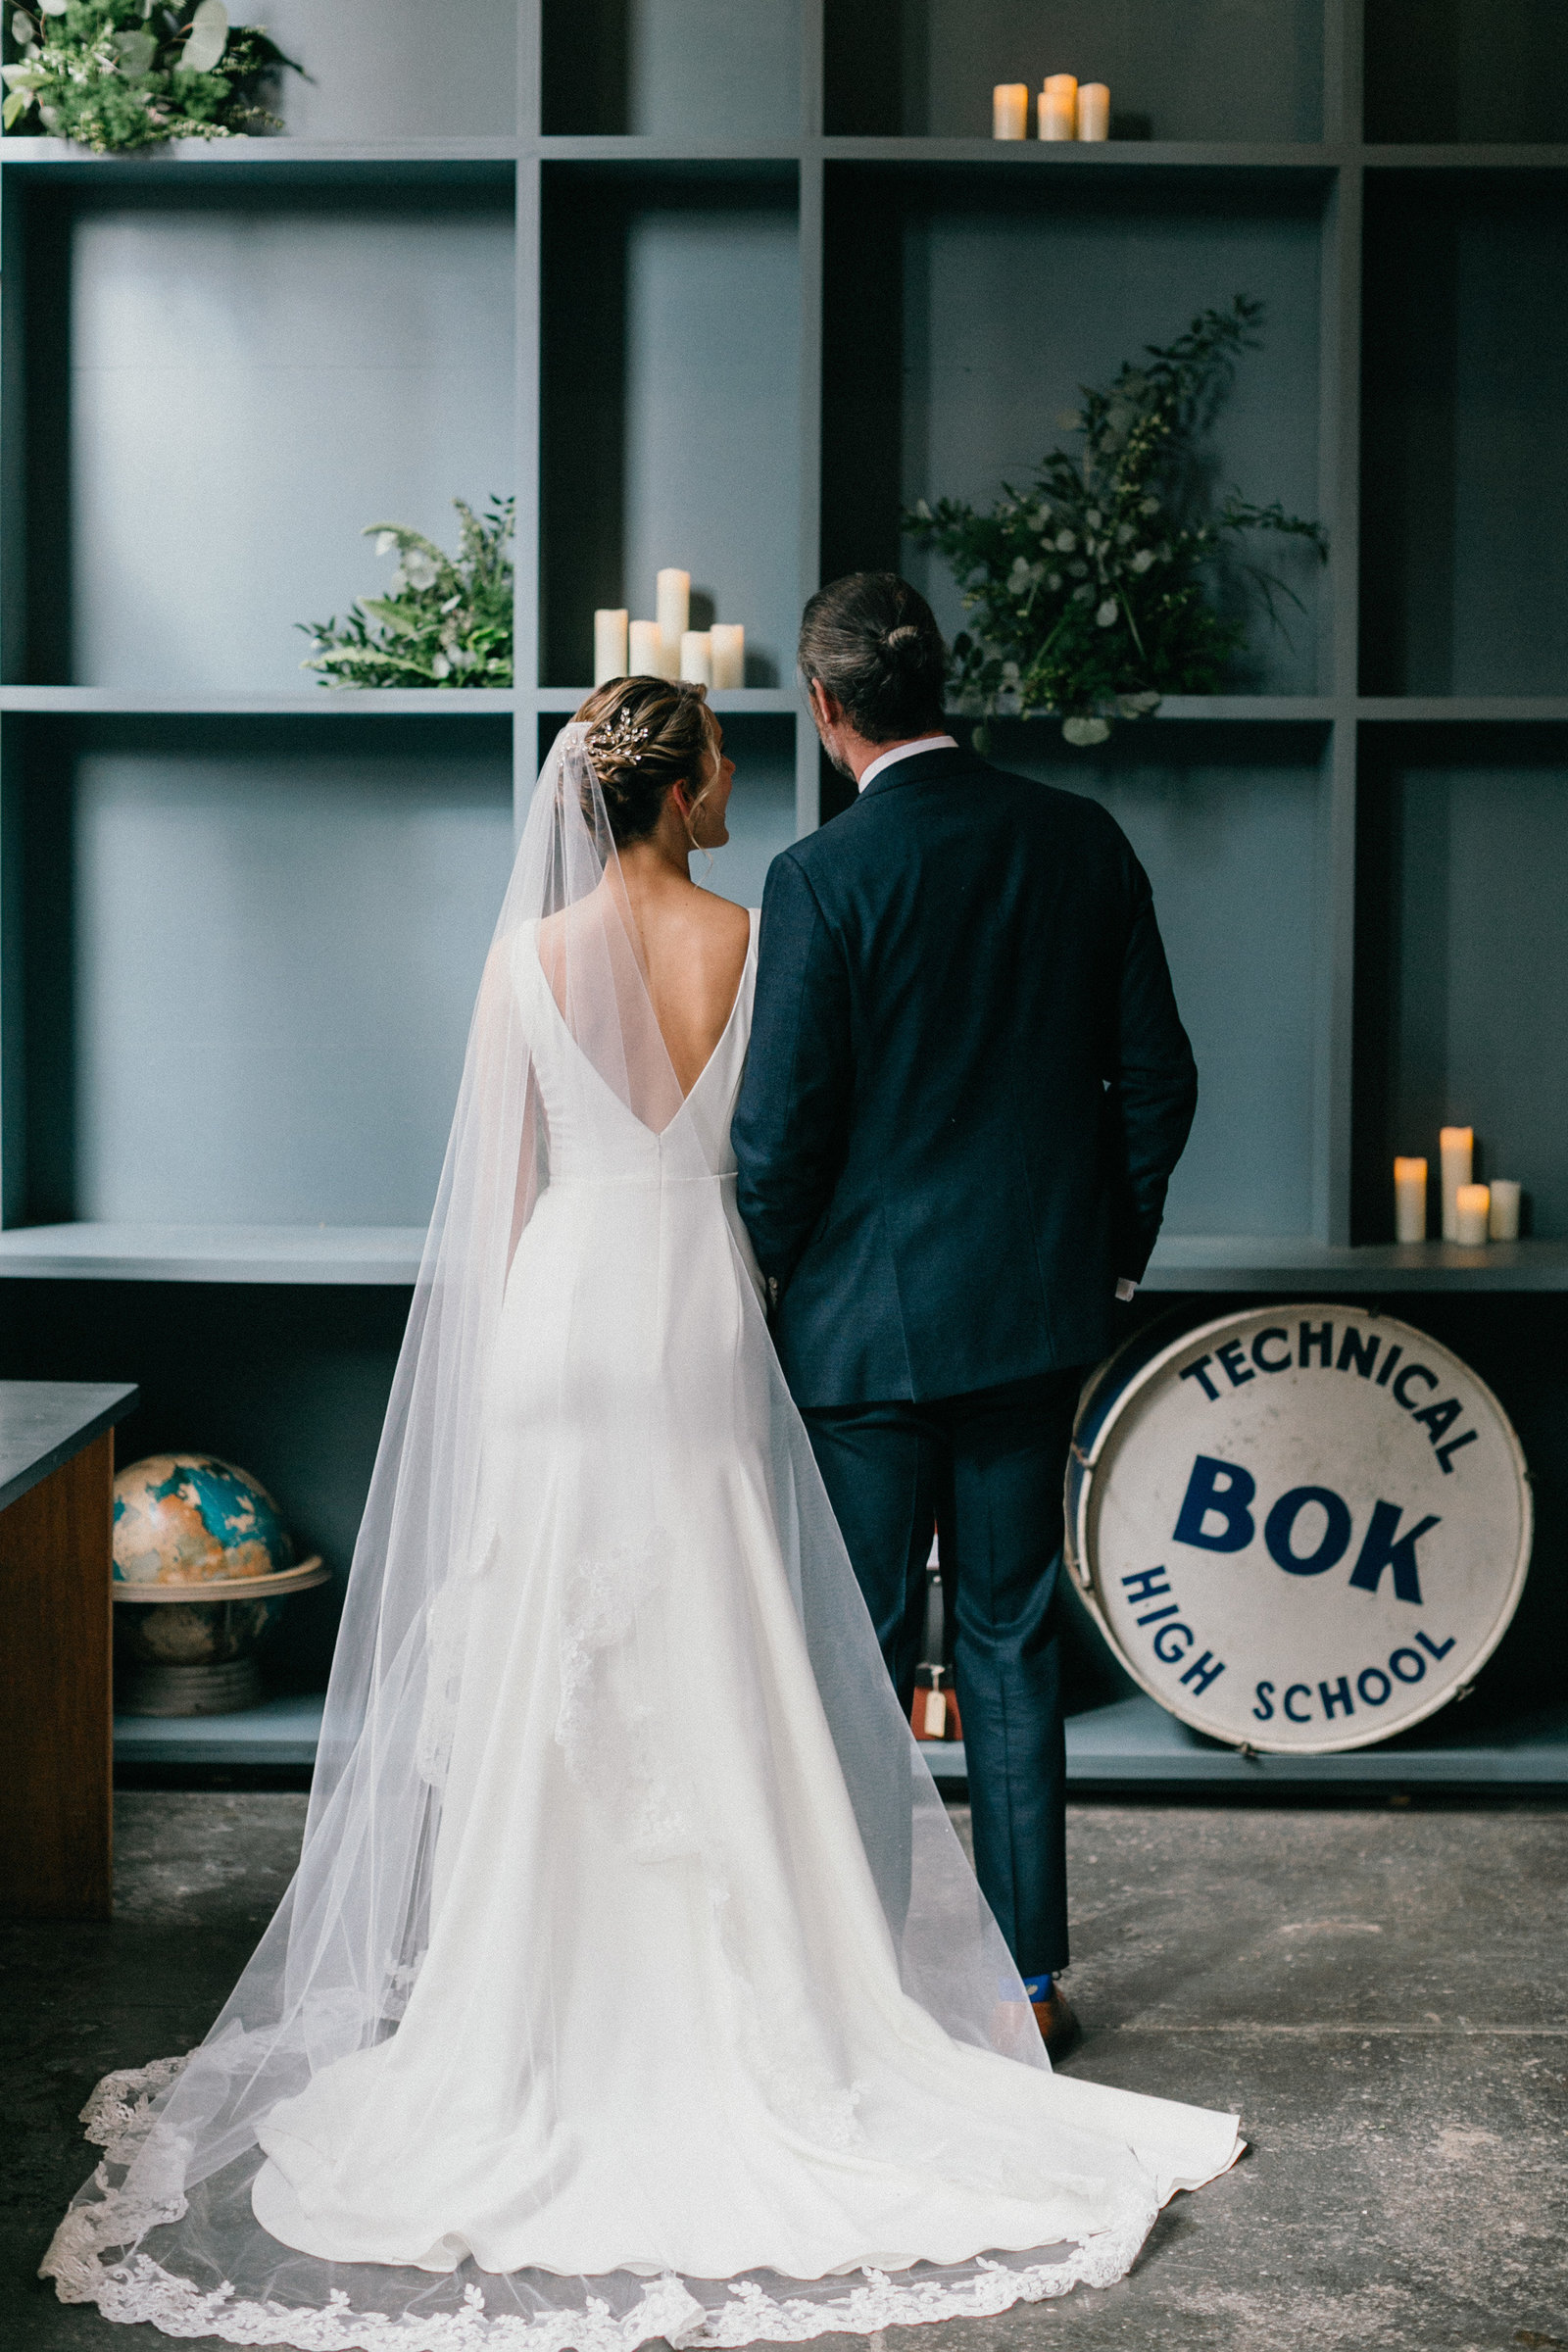 An alternative wedding at Bok in South Philadelphia full of creative and old school feels.